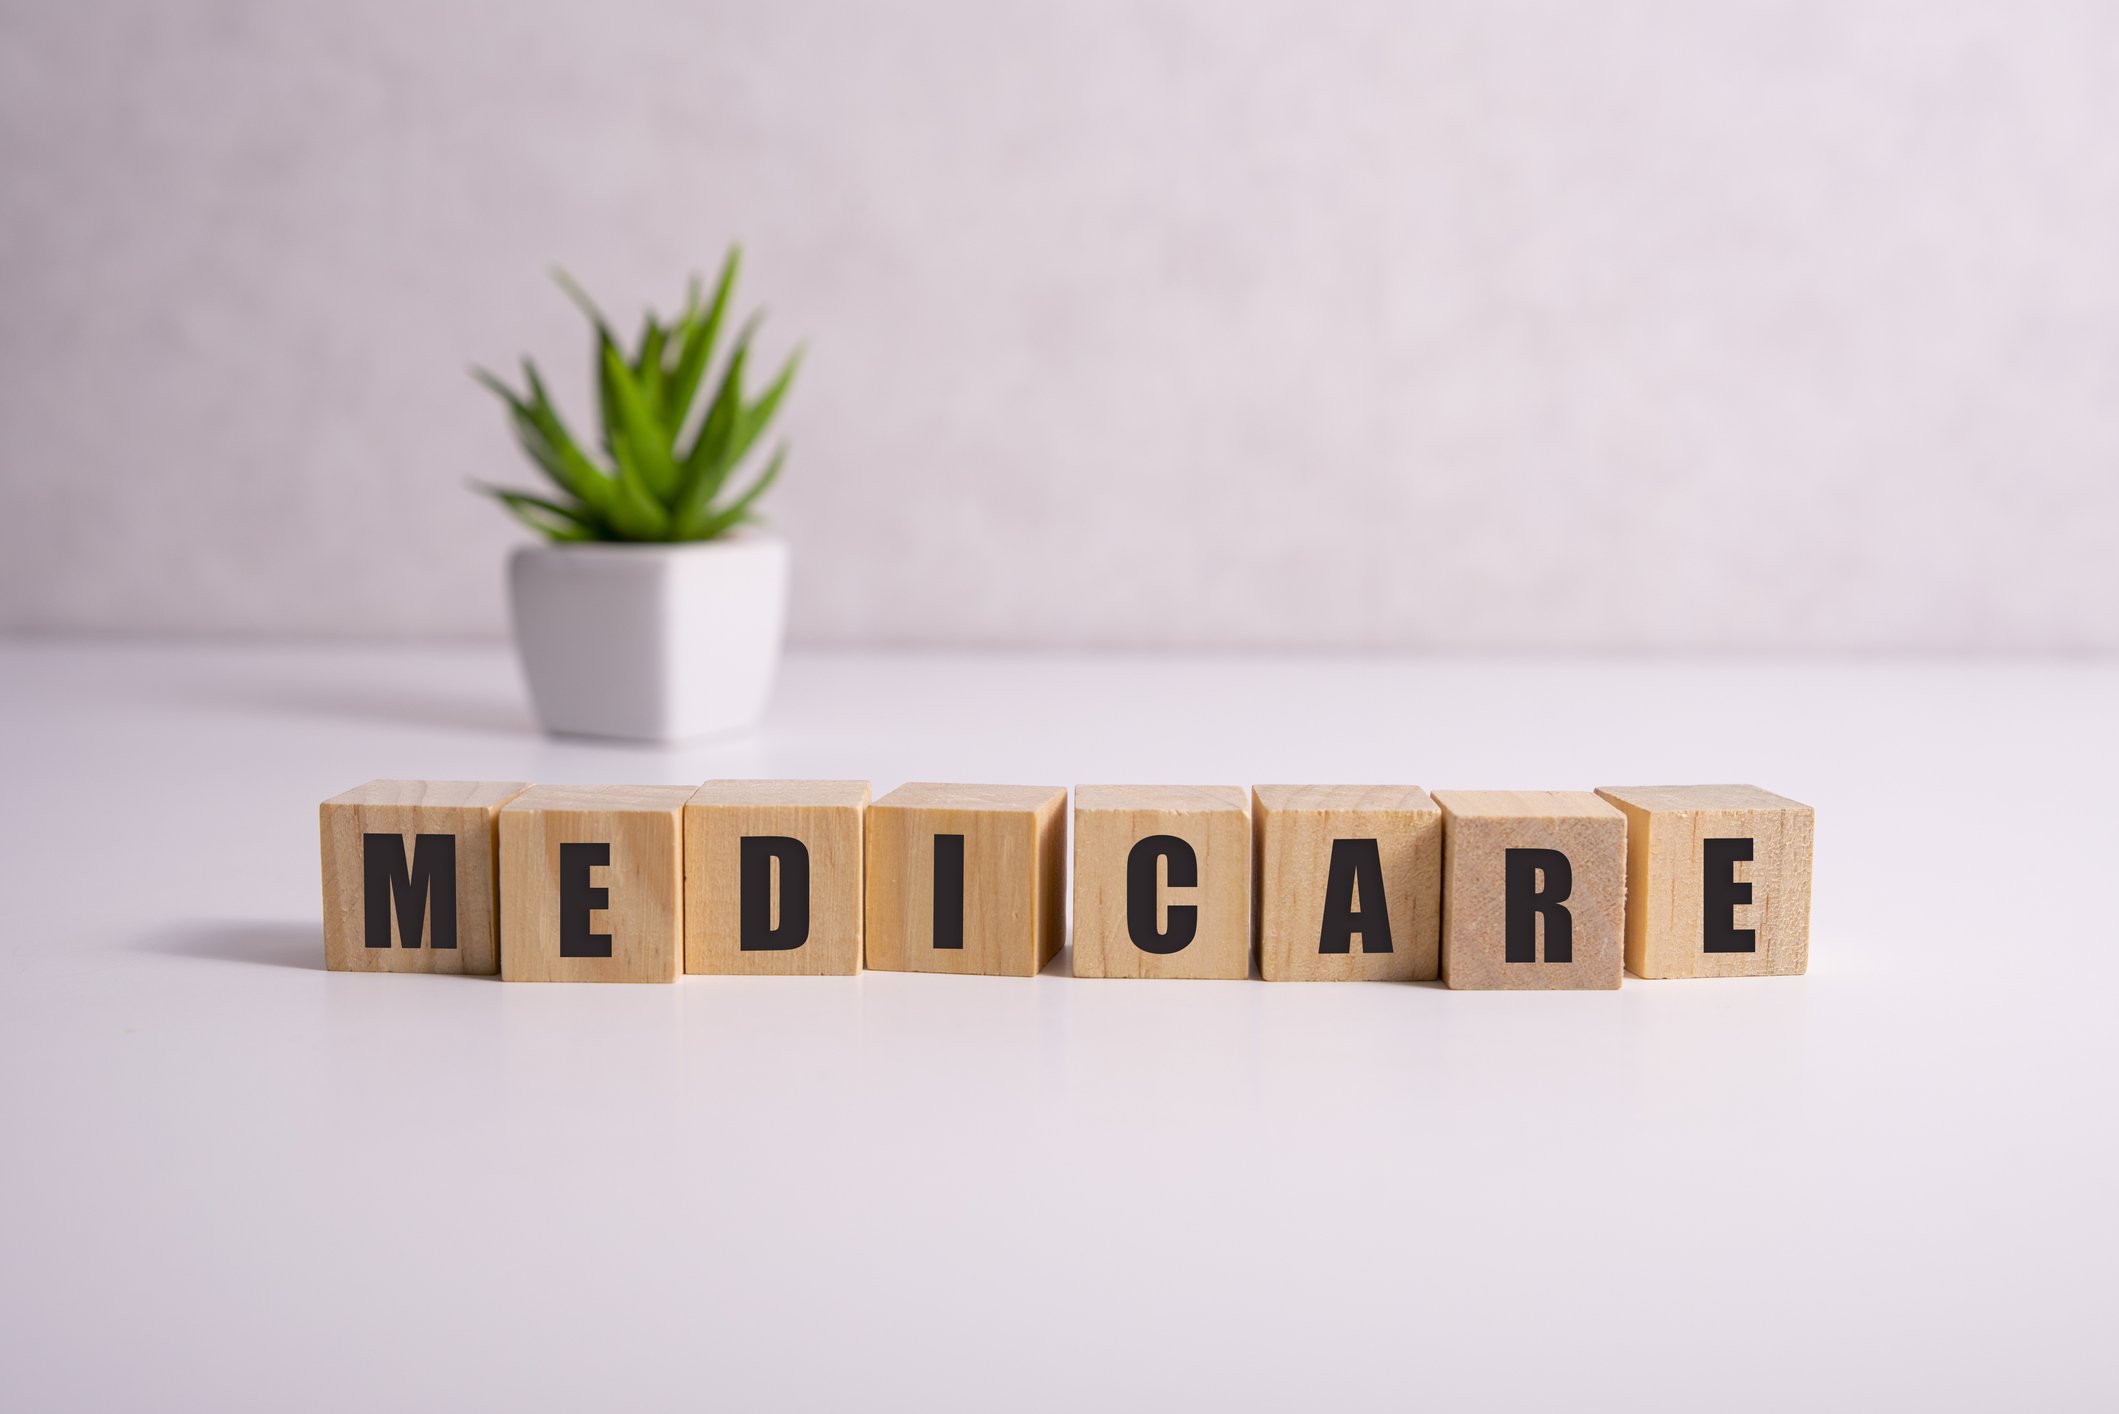 3 Questions You May Have About Medicare SHP Financial